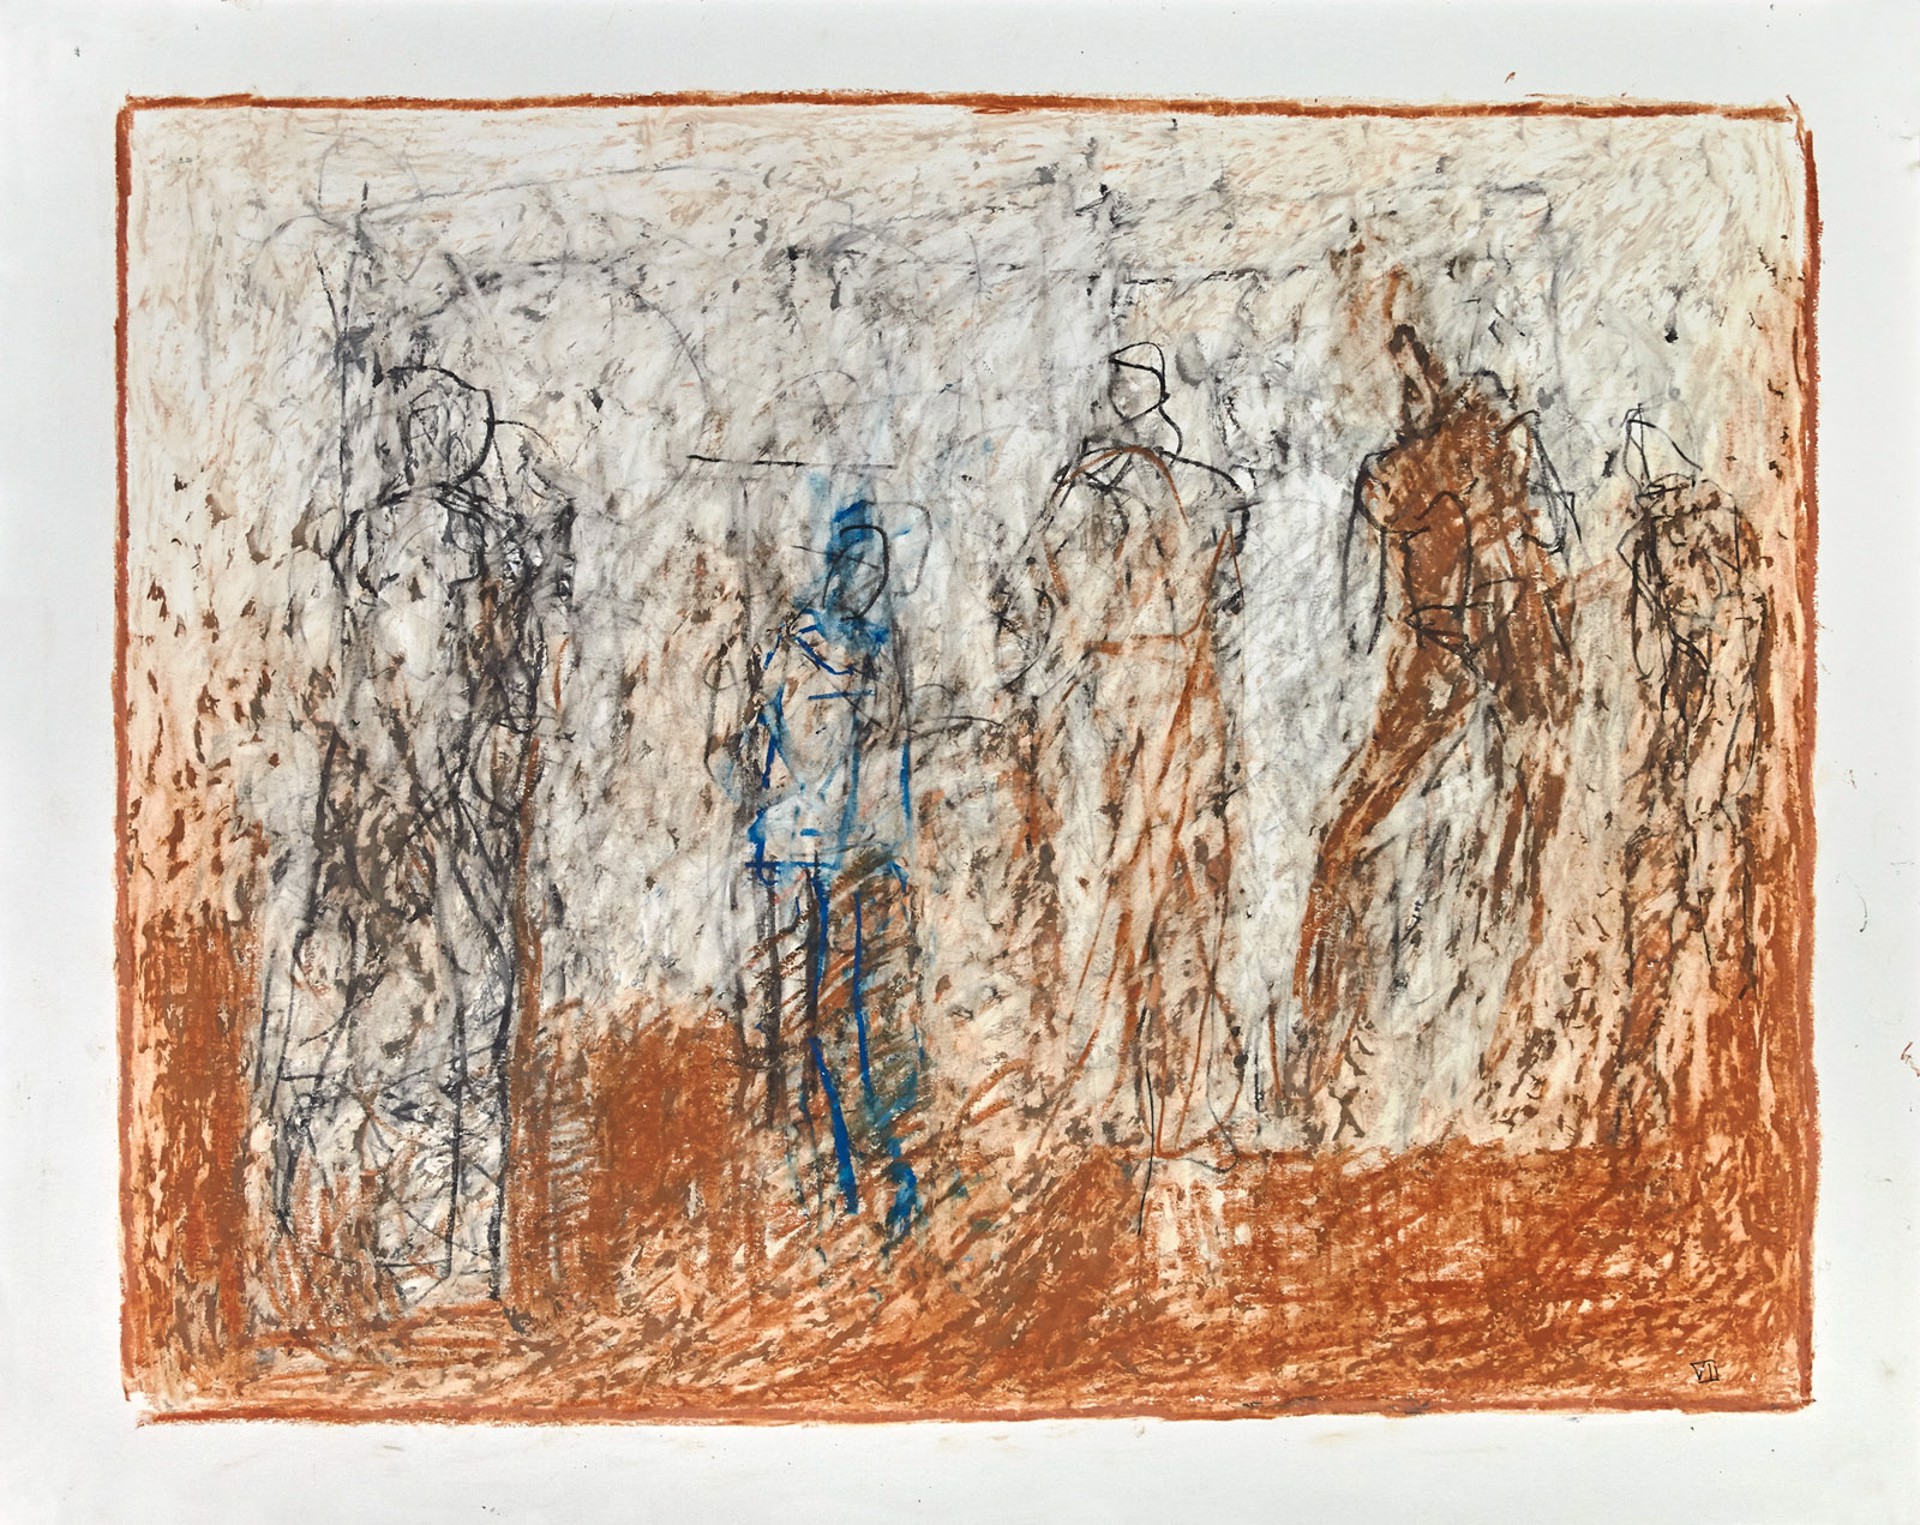 Drawings from Mt Gretna: Excavation by Thaddeus Radell